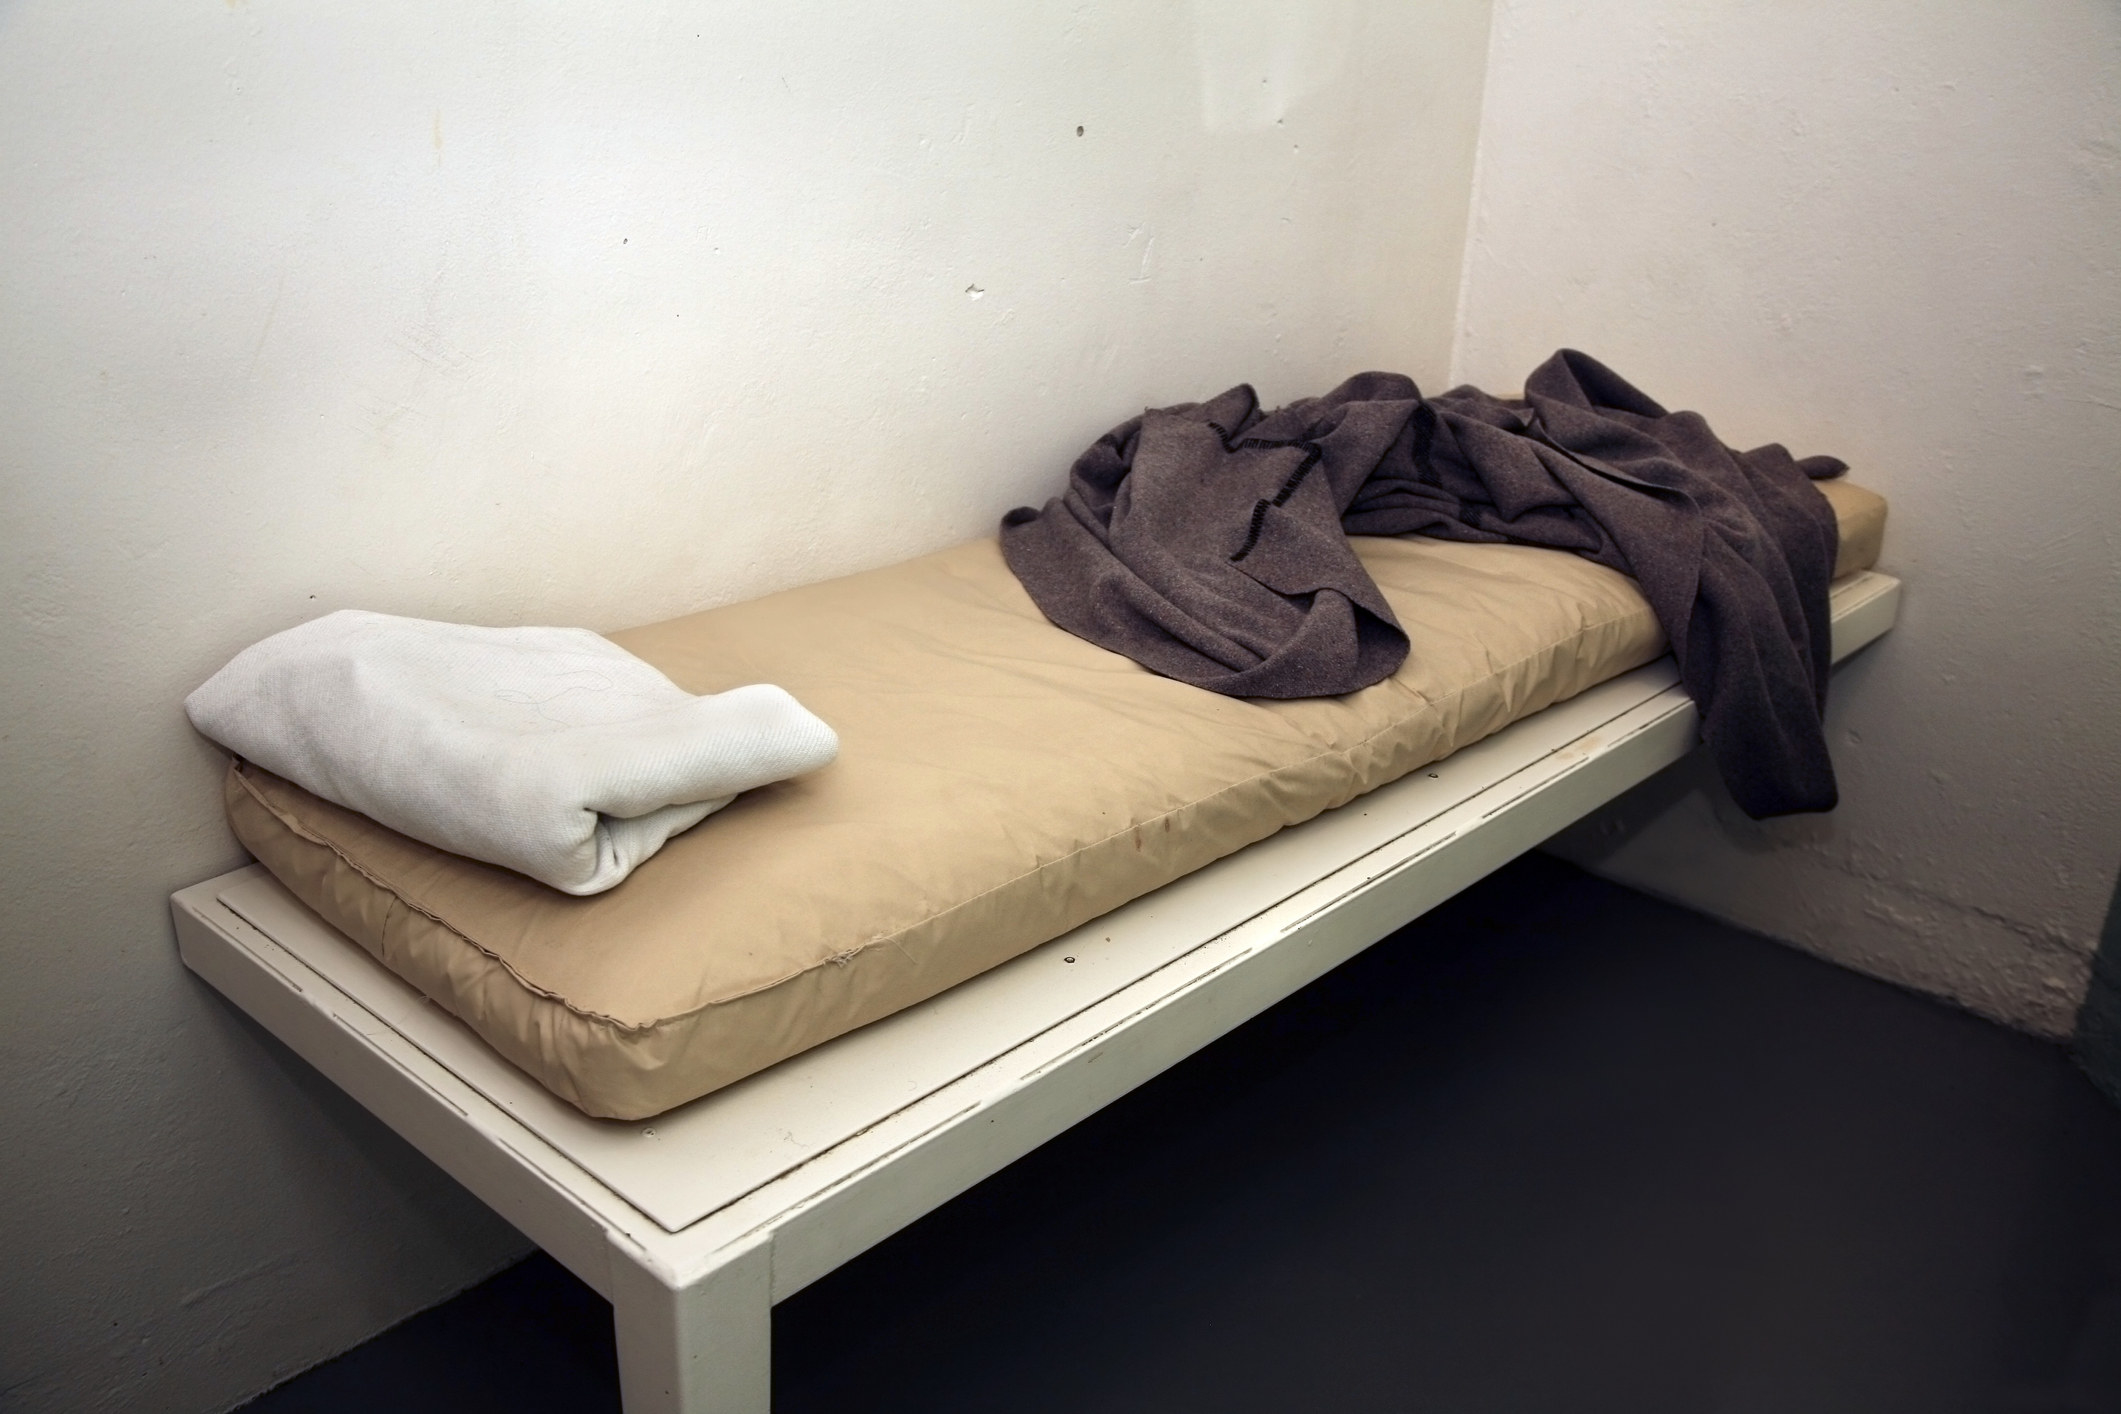 A simple bed in an empty cell